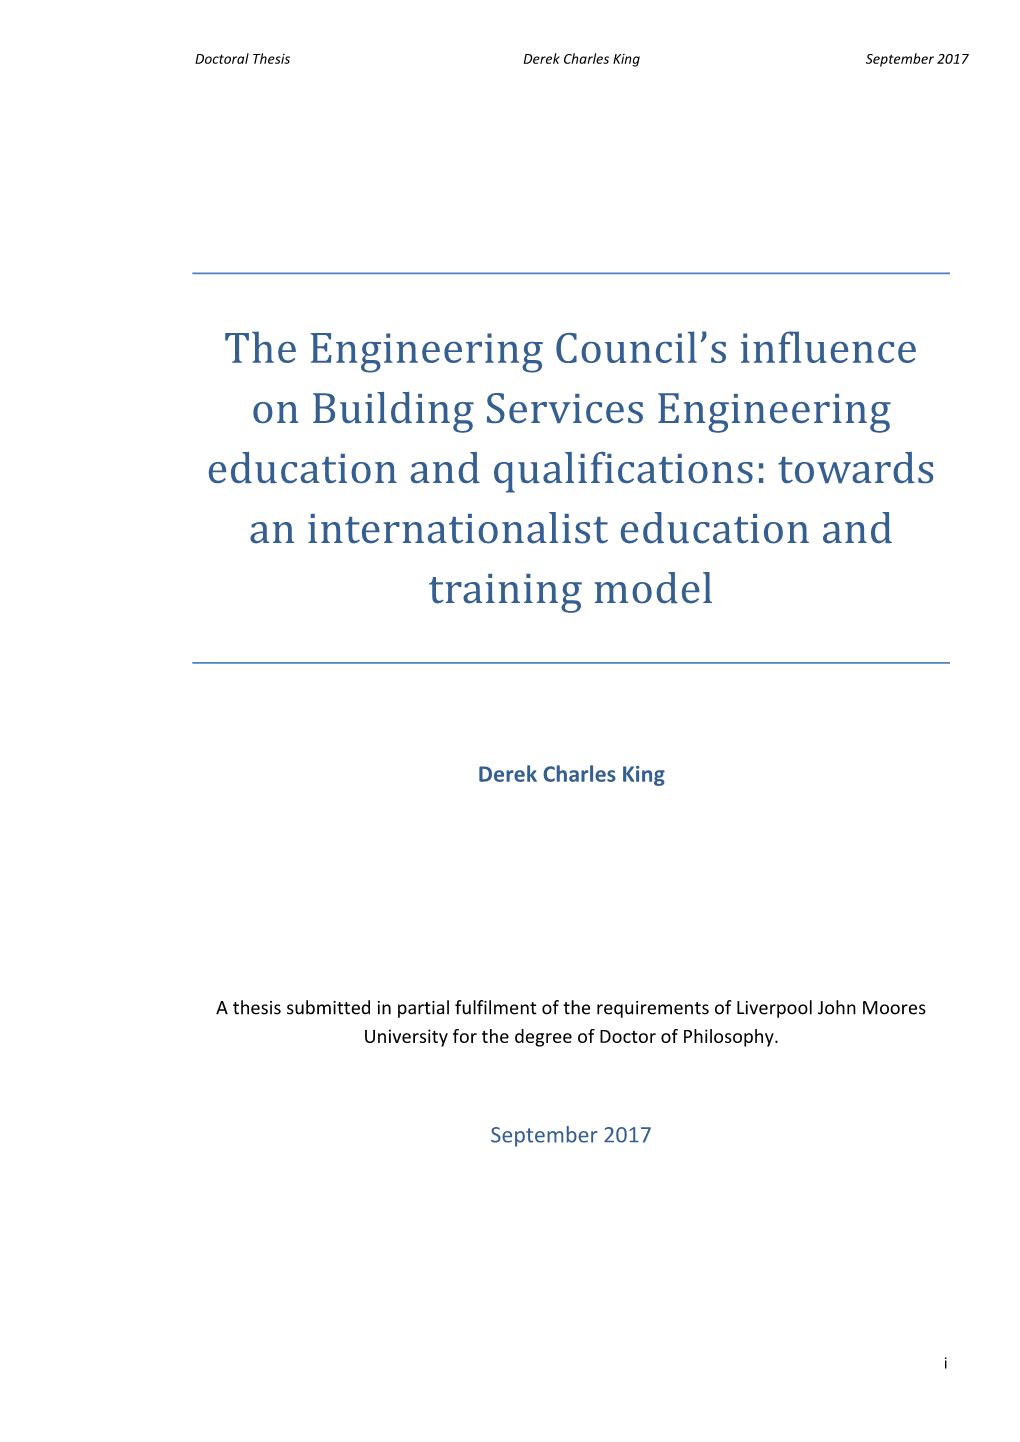 The Engineering Council's Influence on Building Services Engineering Education and Qualifications: Towards an Internationalist